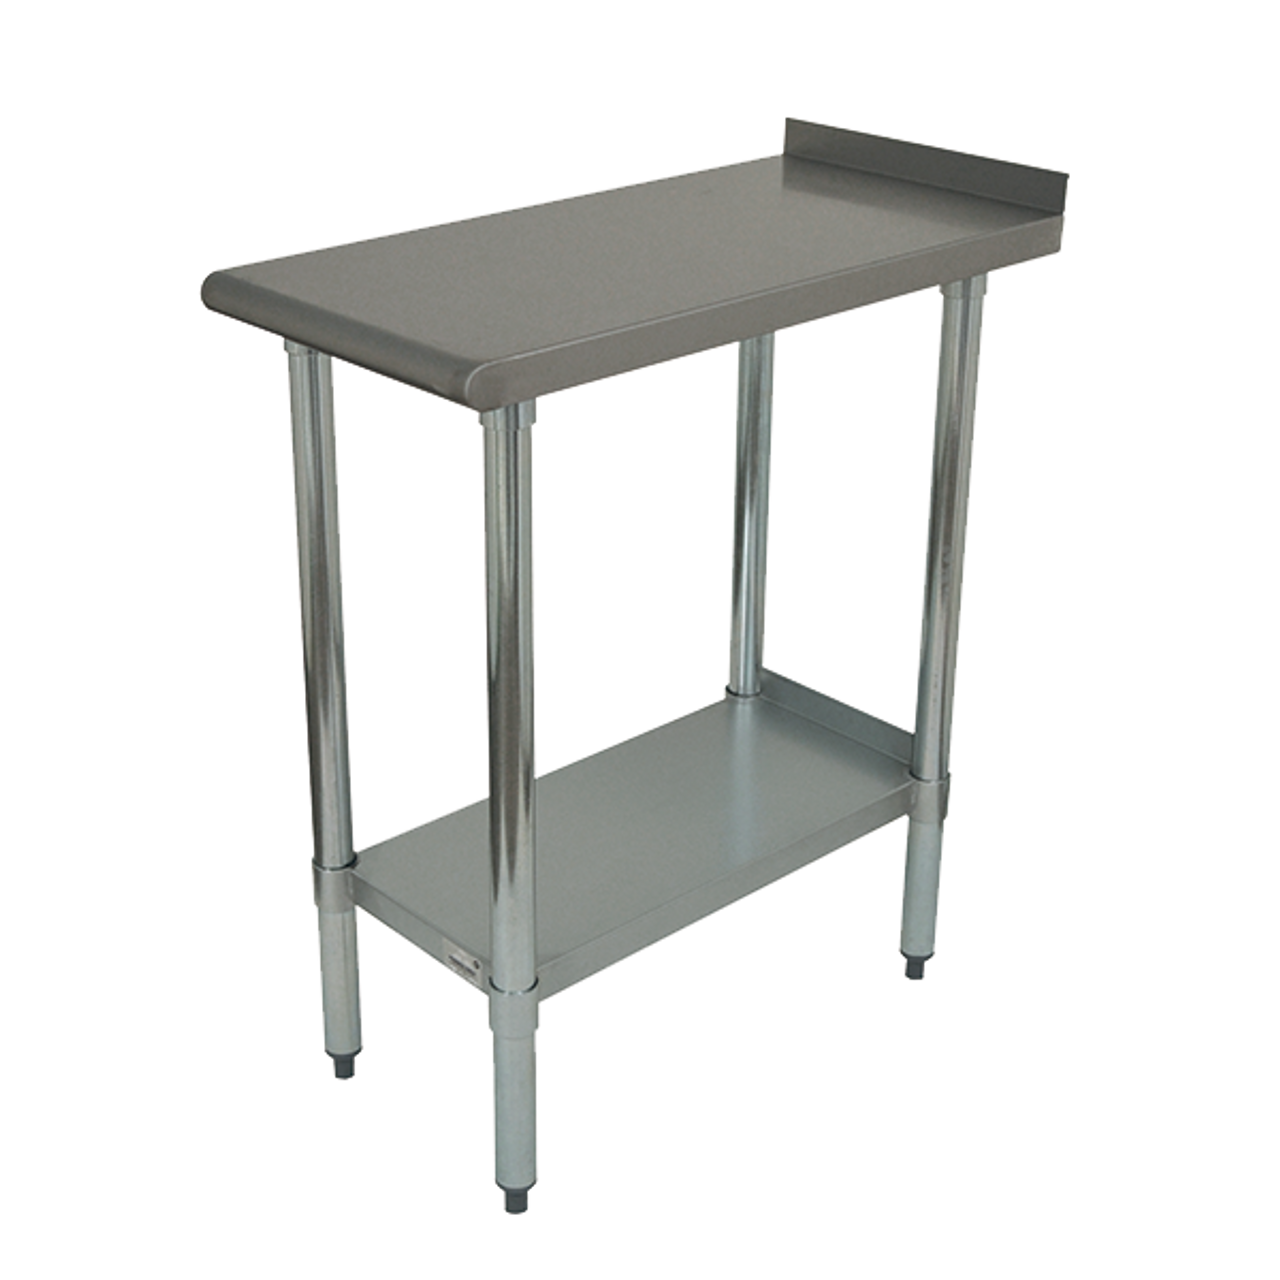 Special Value Equipment Filler Table, 18"W x 30"D, 18 gauge 430 stainless steel, galvanized undershelf & legs, adjustable plastic bullet feet, NSF (filler table needs to be placed between (2) other tables for stability)